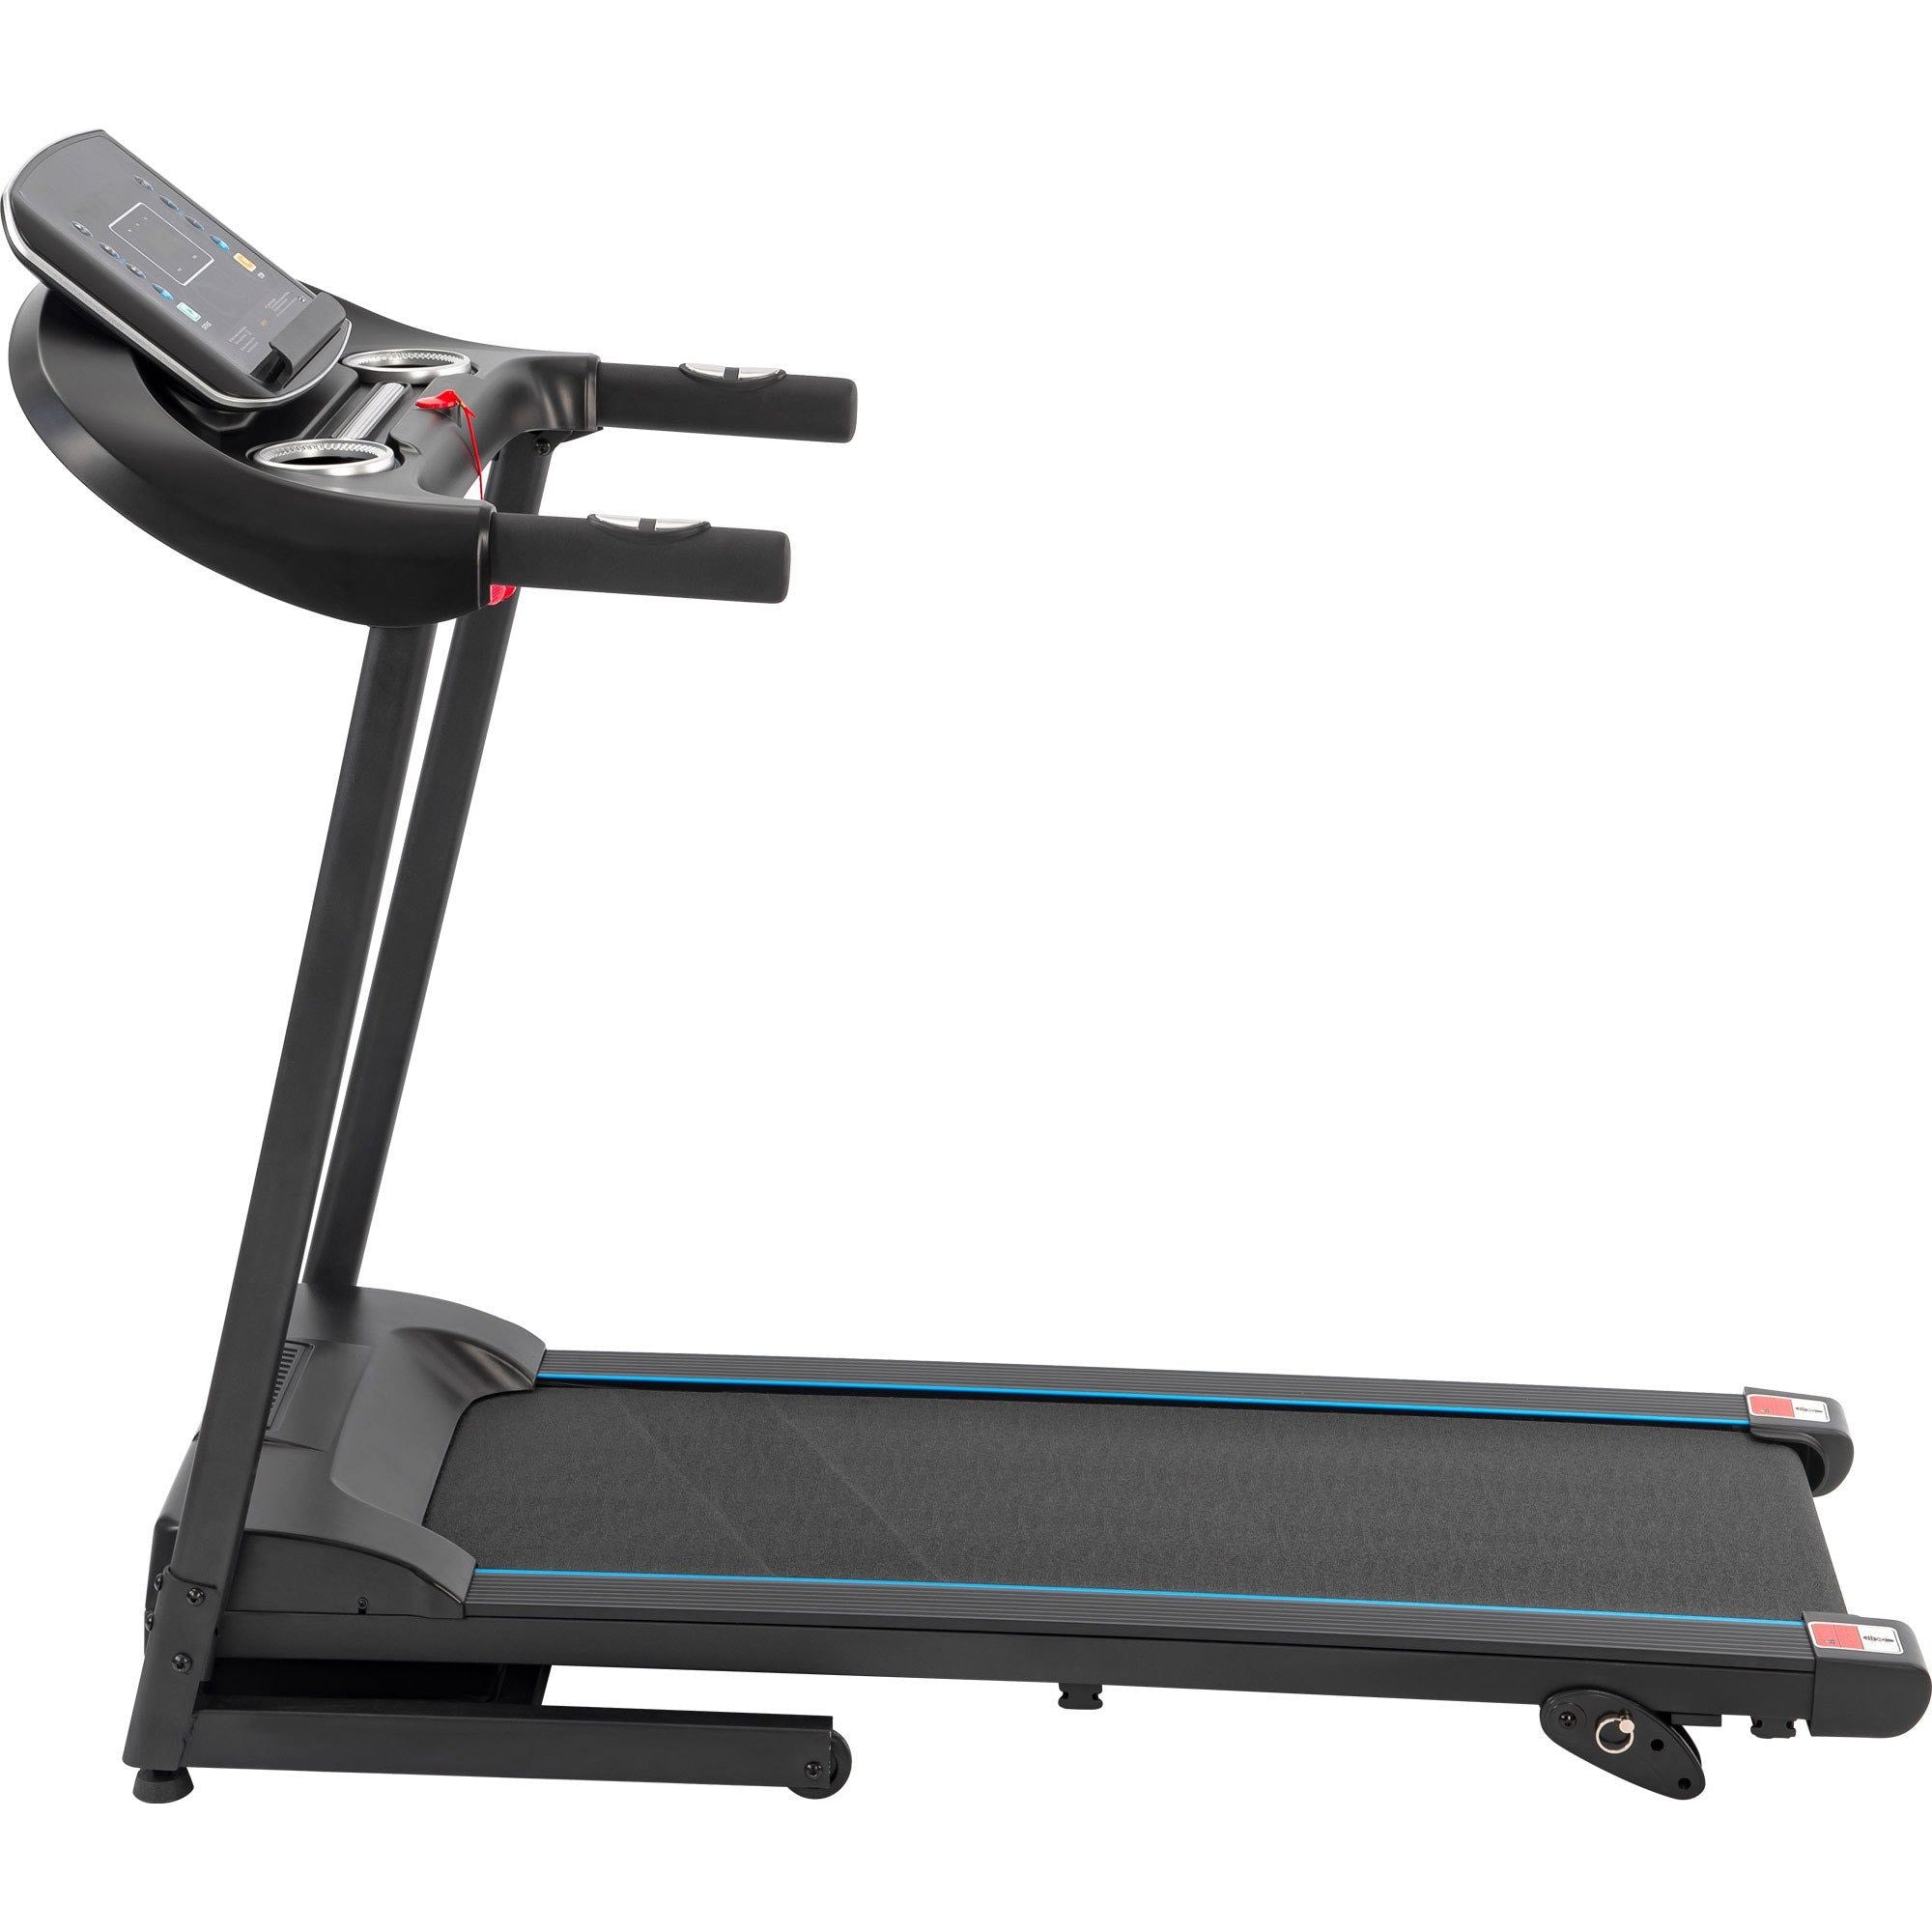 Electric Motorized Treadmill with Audio Speakers; Max. 10 MPH